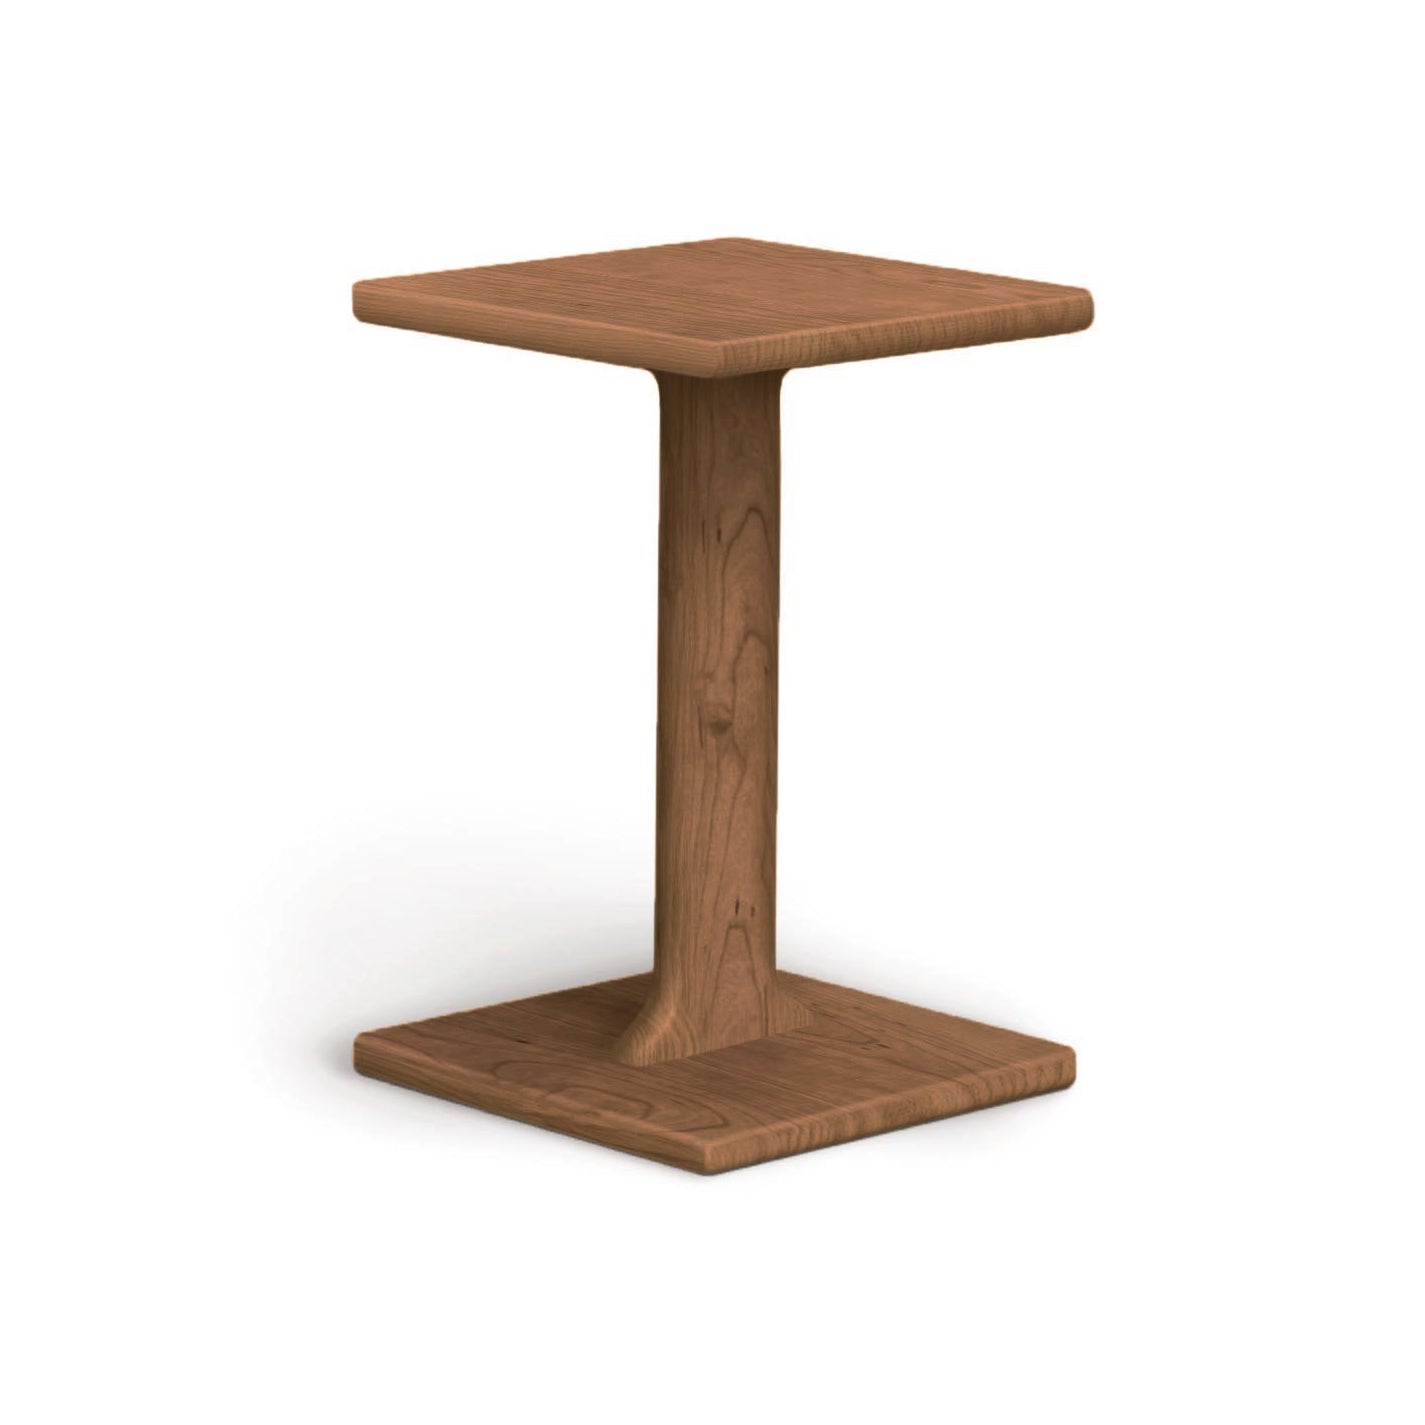 A simple Sierra Chair Table crafted from solid North American hardwood by Copeland Furniture with a square top and base on a white background.